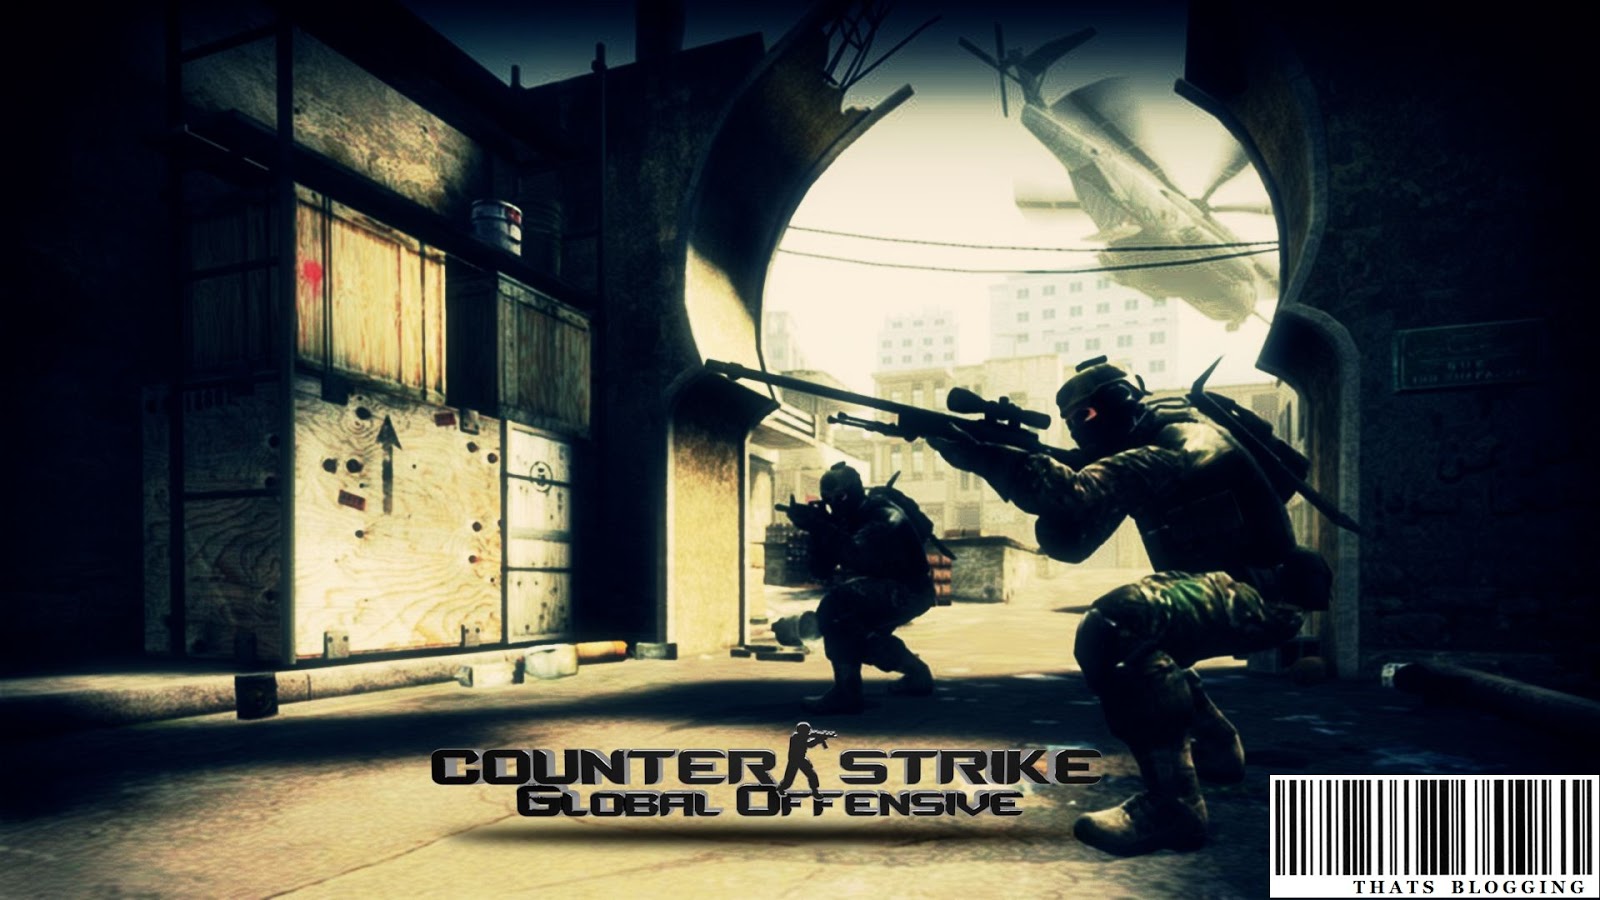 Download Counter Strike 16 High Definition Wallpapers Blogging